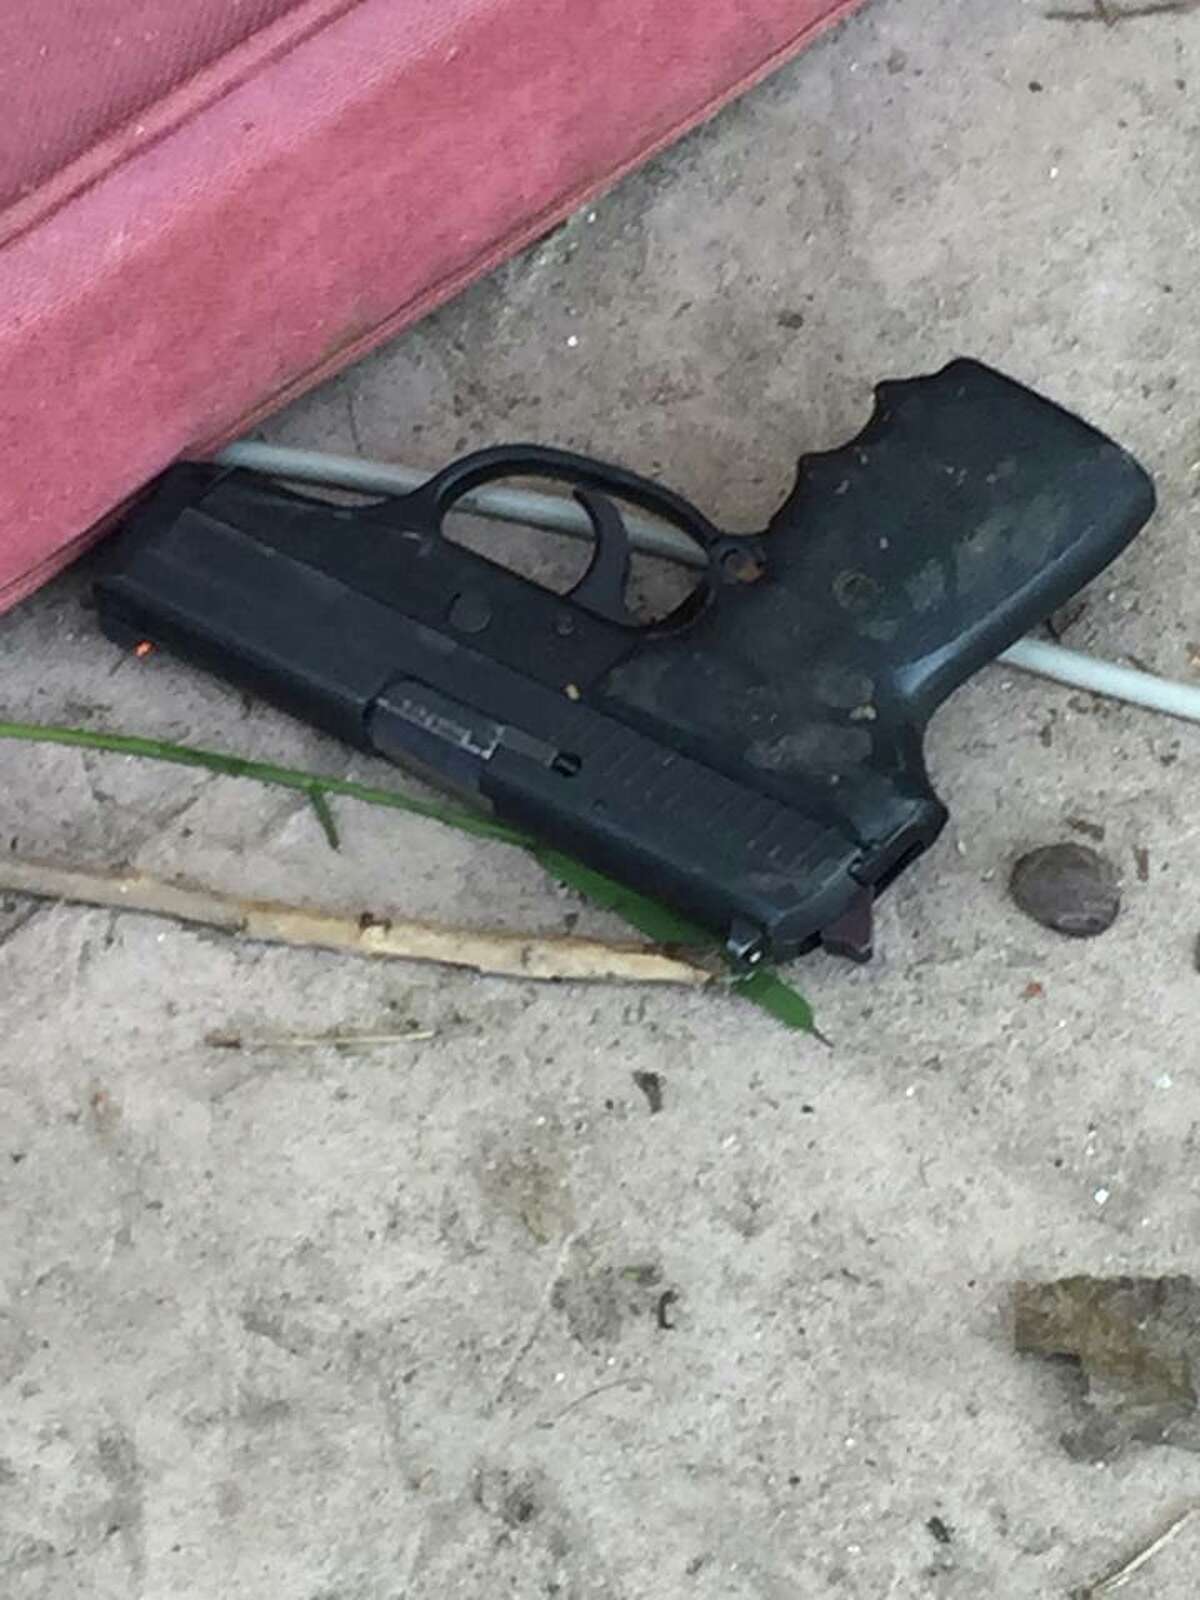 A photo of the gun a 49-year-old Byron man allegedly raised before he was shot and killed by Contra Costa County Sheriff’s Office deputies.